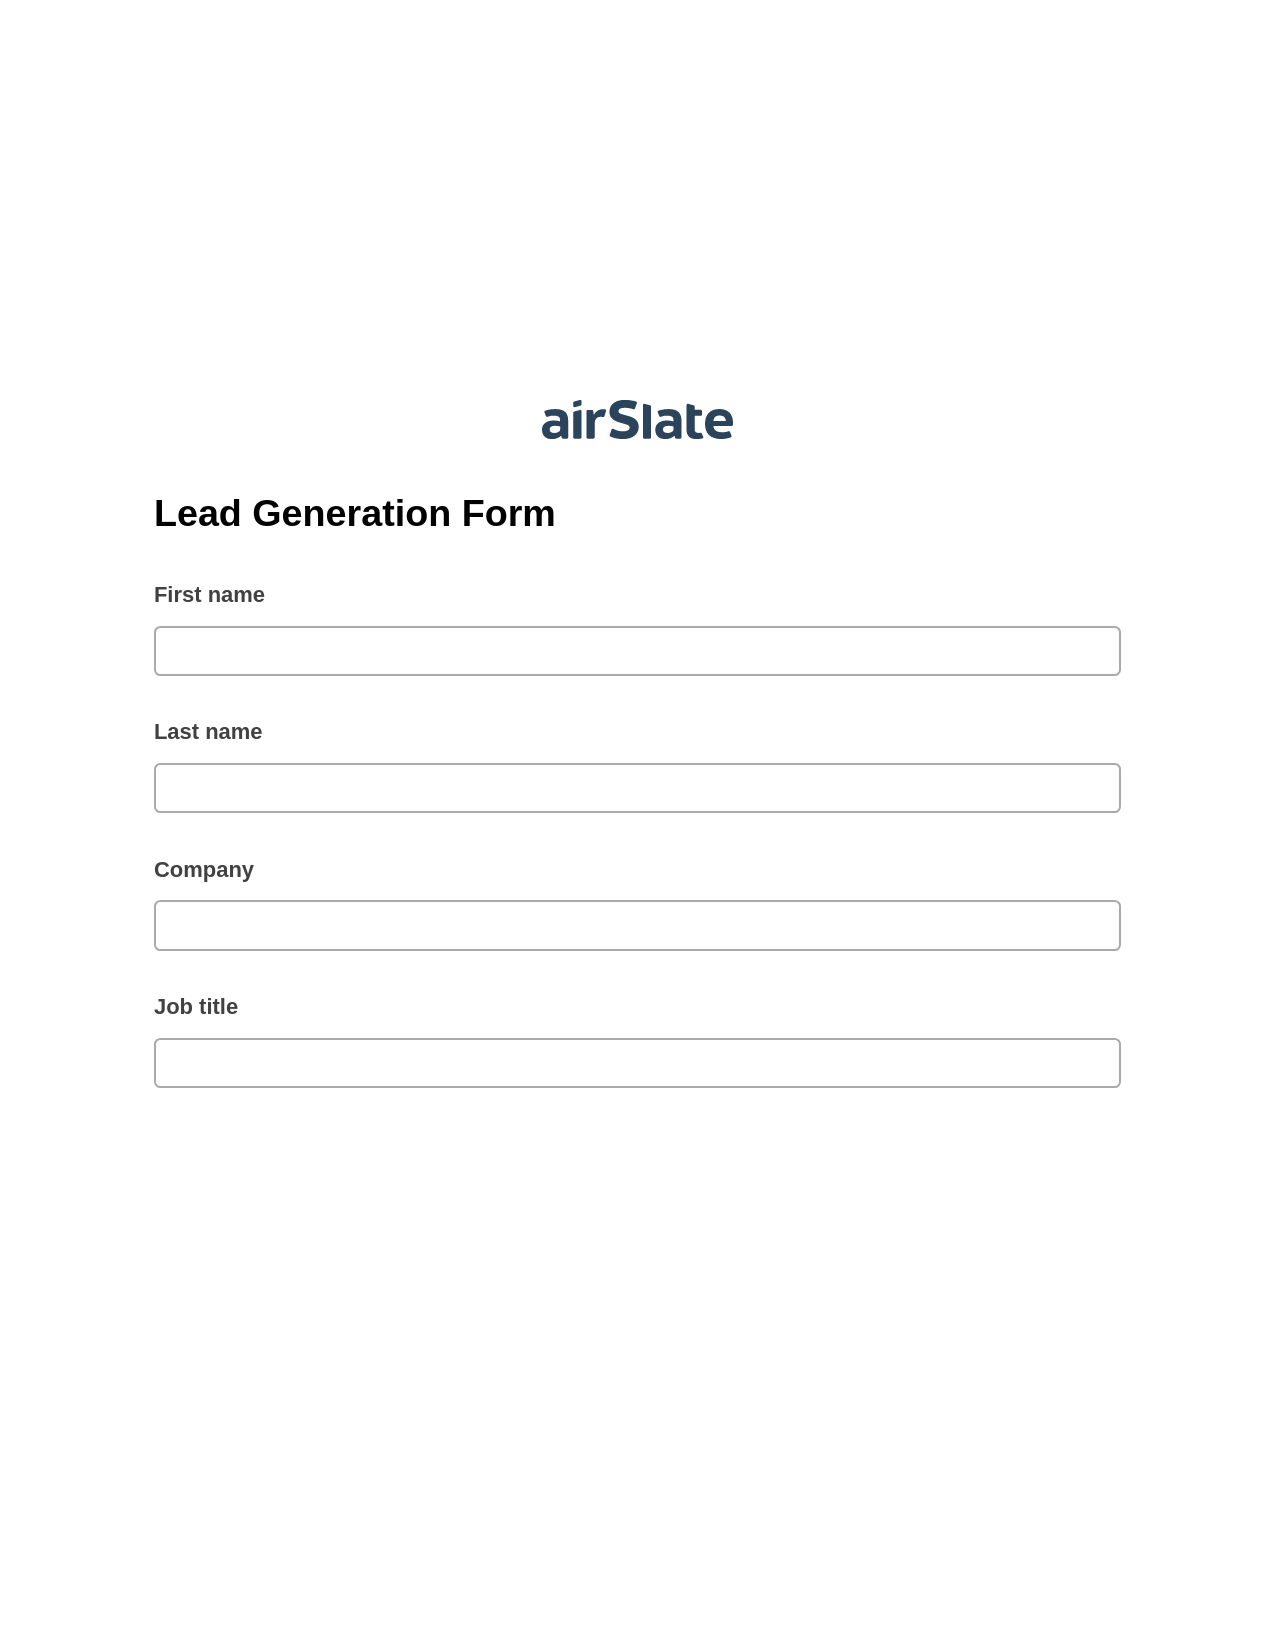 Lead Generation Form Pre-fill Document Bot, Remove Tags From Slate Bot, Export to Salesforce Record Bot